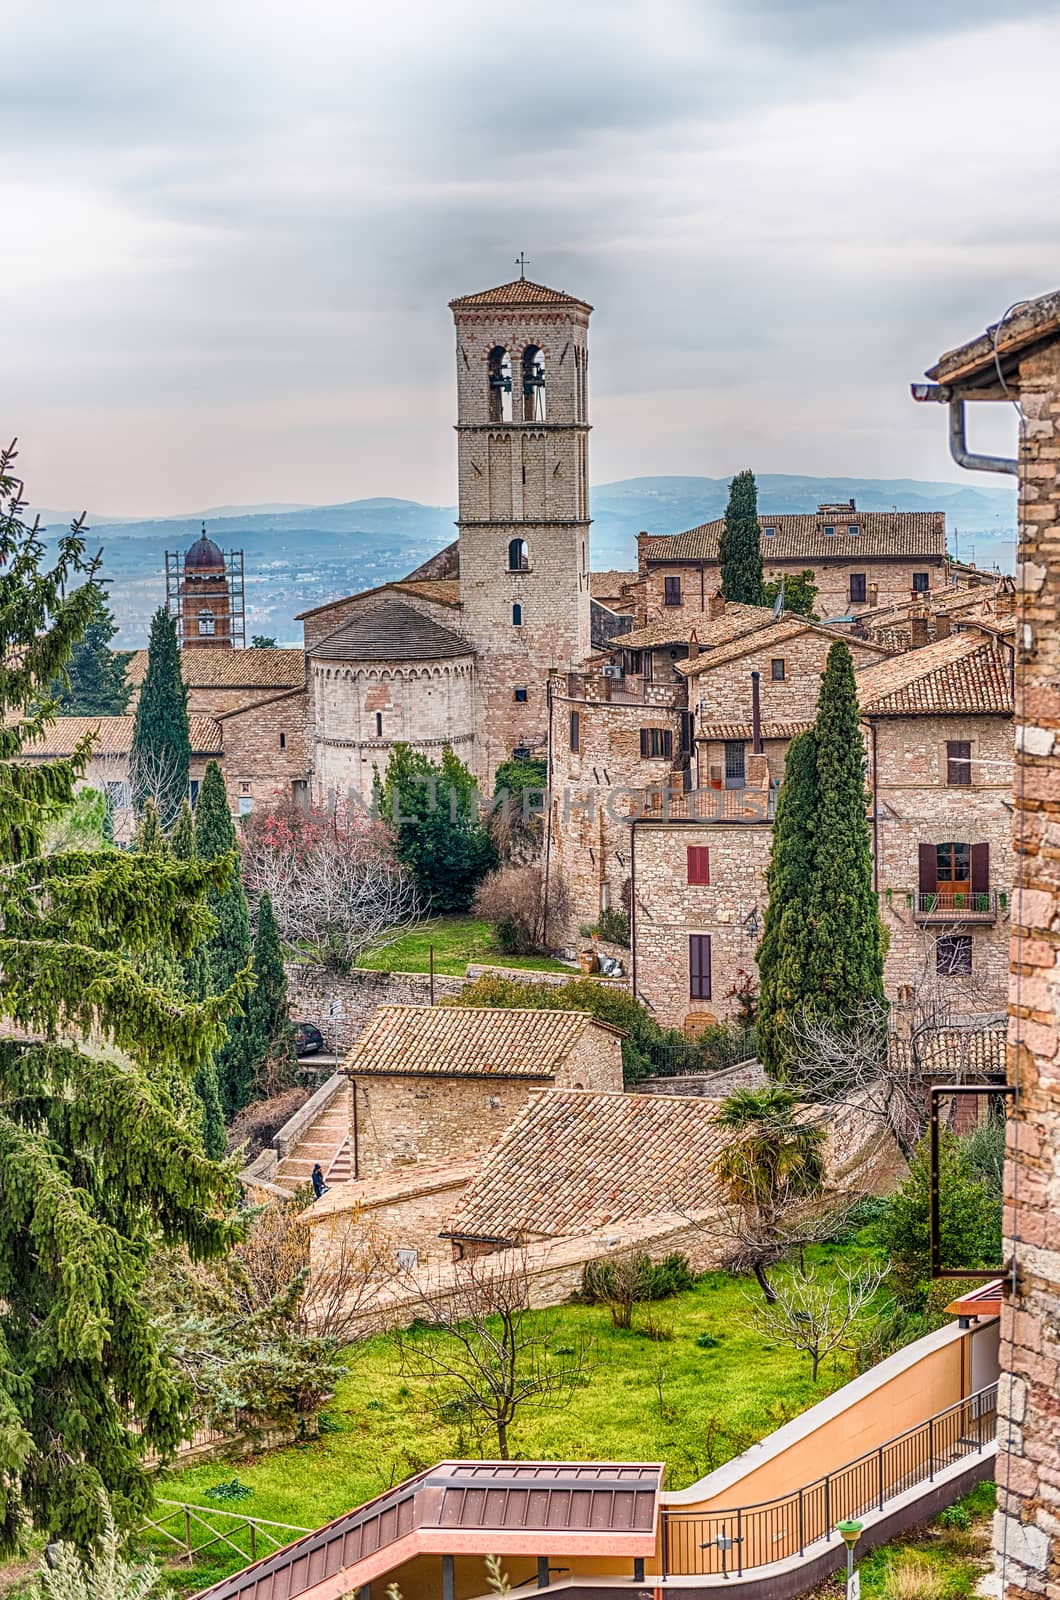 Scenic view of the medieval town of Assisi, Umbria, Italy by marcorubino